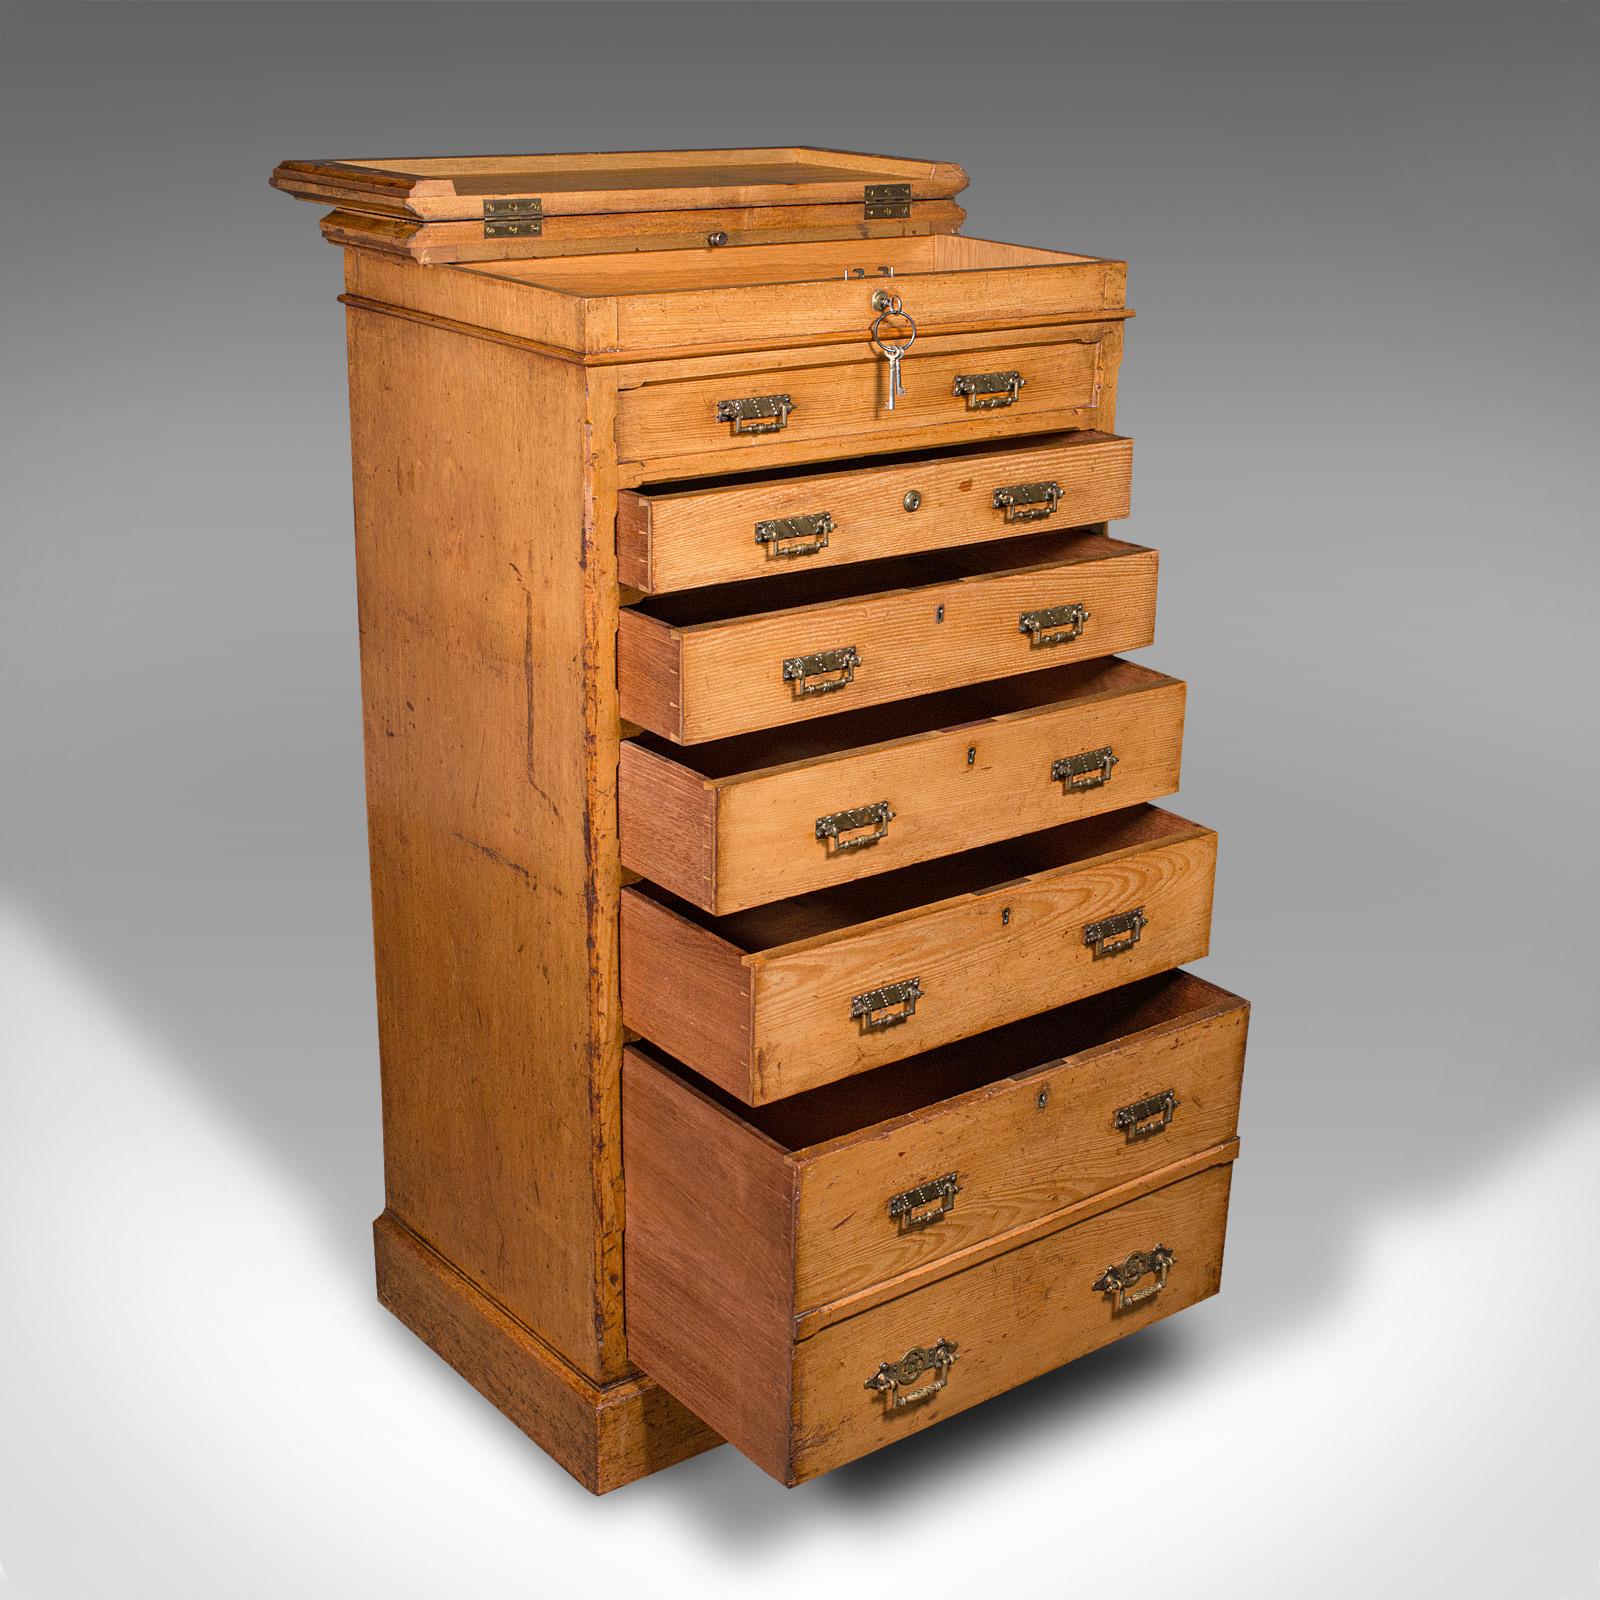 This is an antique banker's chest of drawers. An English, oak tallboy in Aesthetic Period taste by Maple & Co, dating to the late Victorian period, circa 1890.

Exceptional craftsmanship with rich colour and a suite of features
Displays a desirable